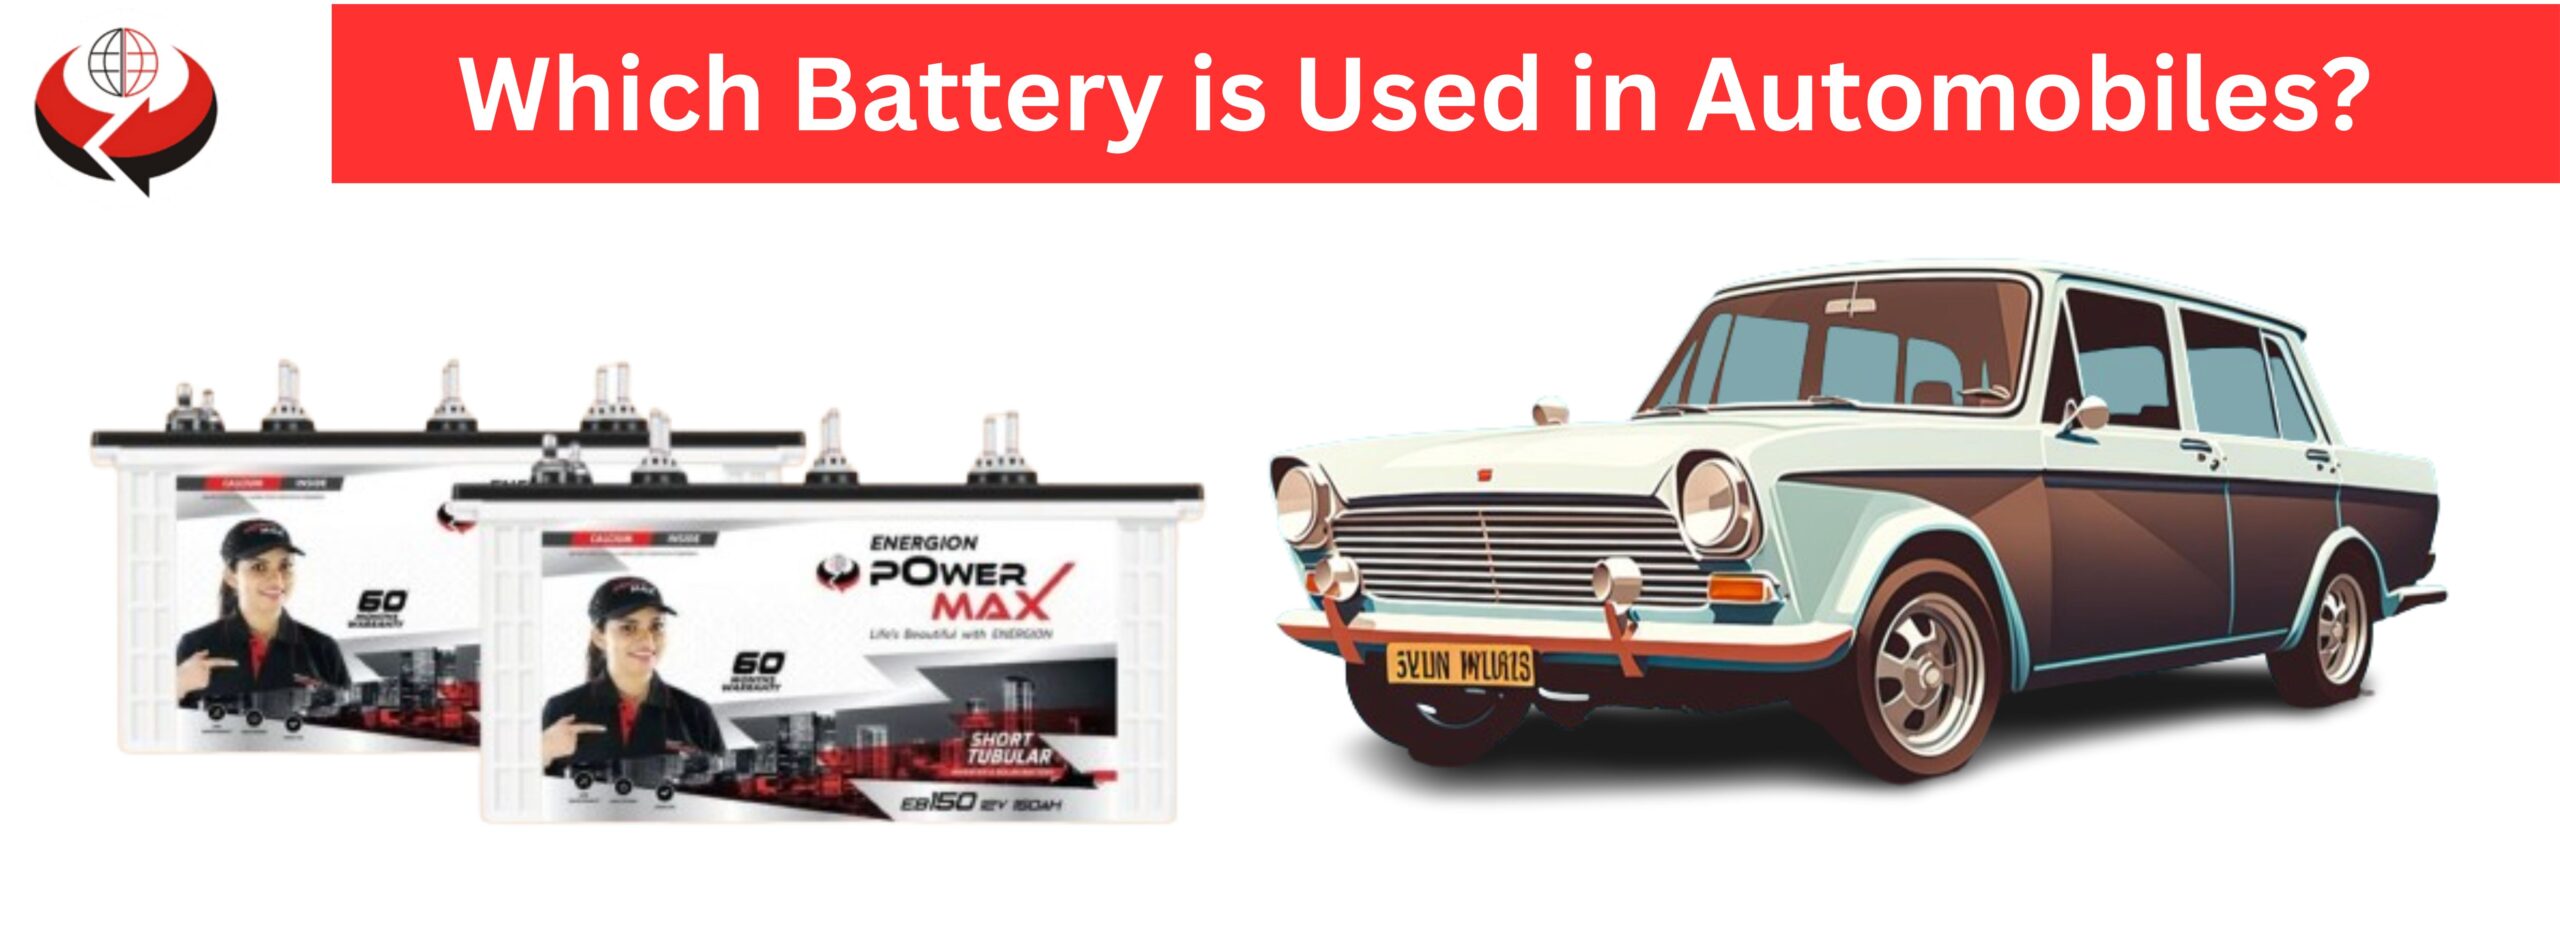 Battery is Used in Automobiles